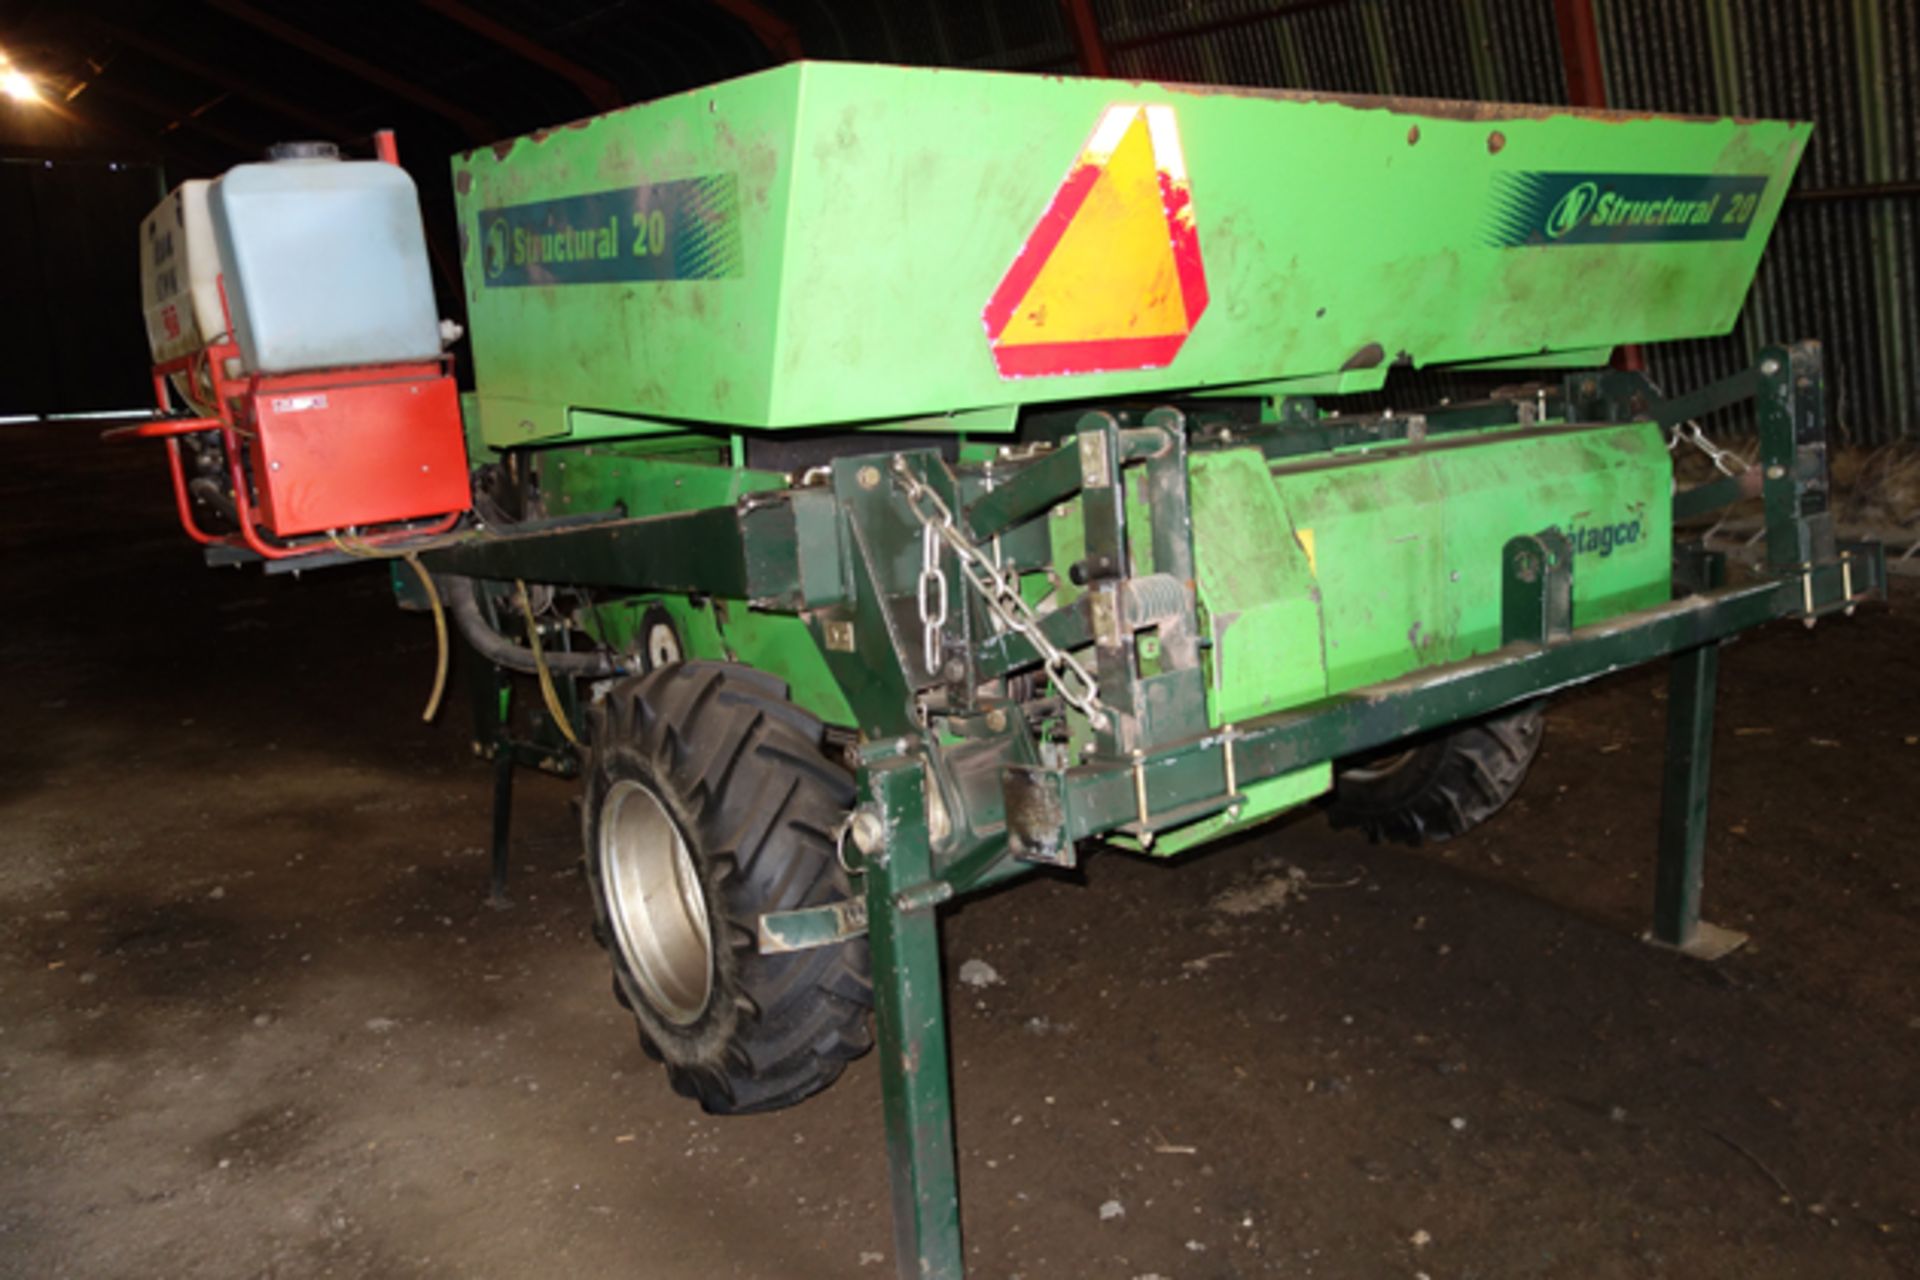 Structural 20-2 row potato planter with Team Act 90 MK. No VAT. Location March, Cambridgeshire. - Image 4 of 4